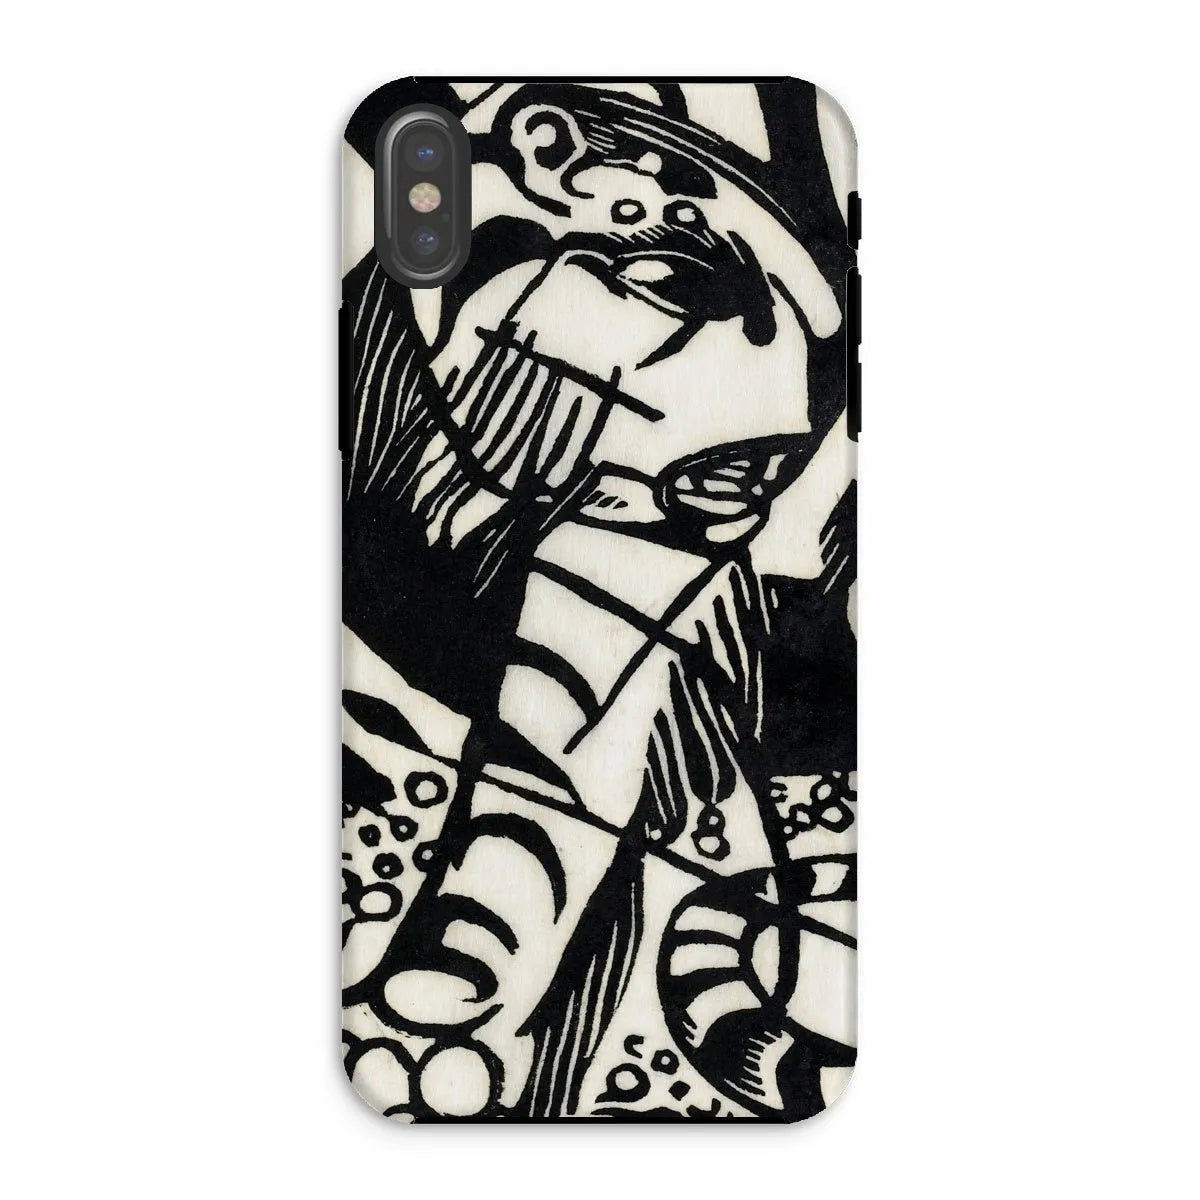 Tiger - Animal Aesthetic Phone Case - Franz Marc - Iphone Xs / Matte - Mobile Phone Cases - Aesthetic Art